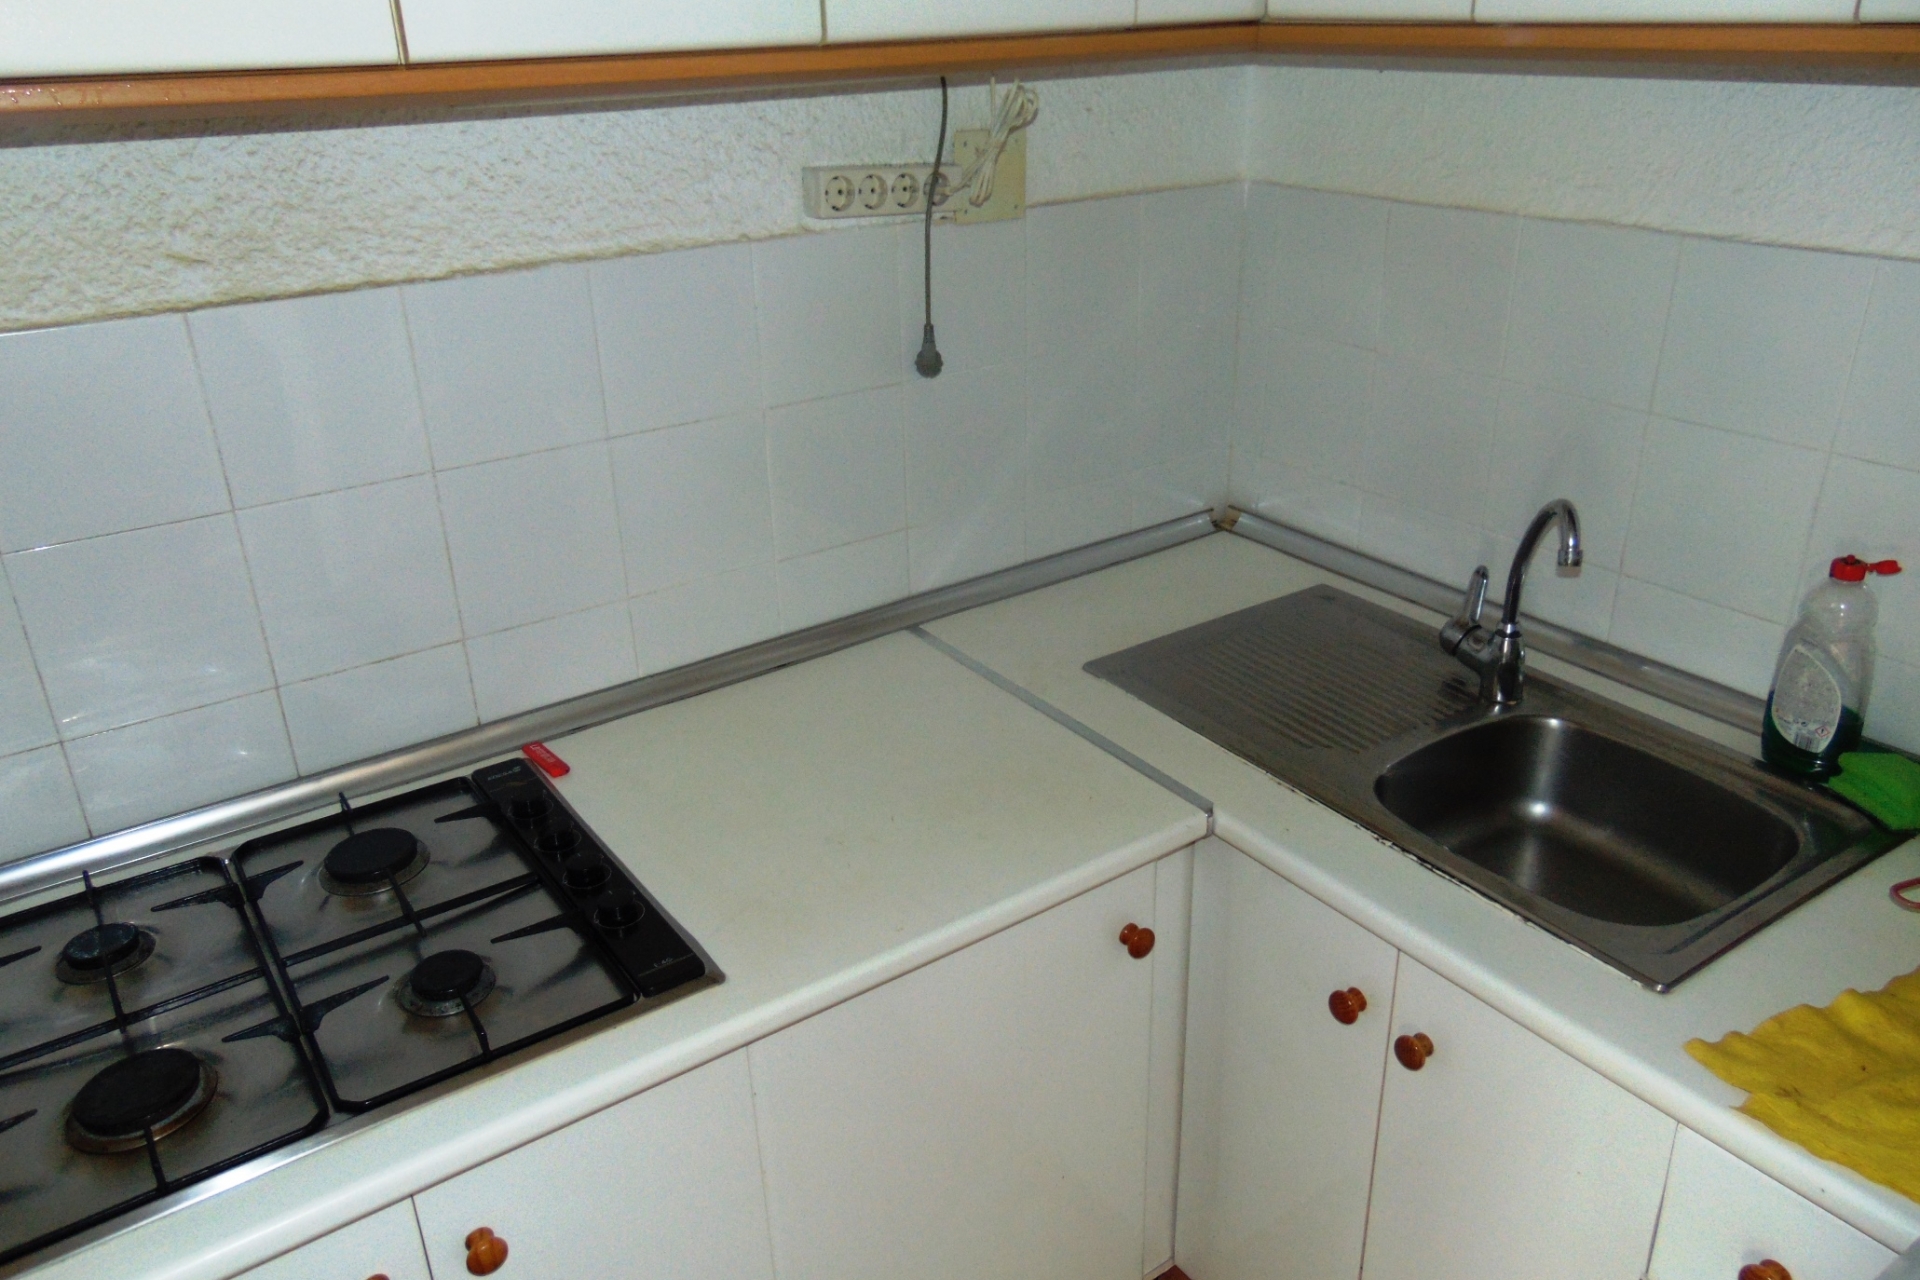 Archived - Bungalow for sale - Torrevieja - Torrevieja Town Centre